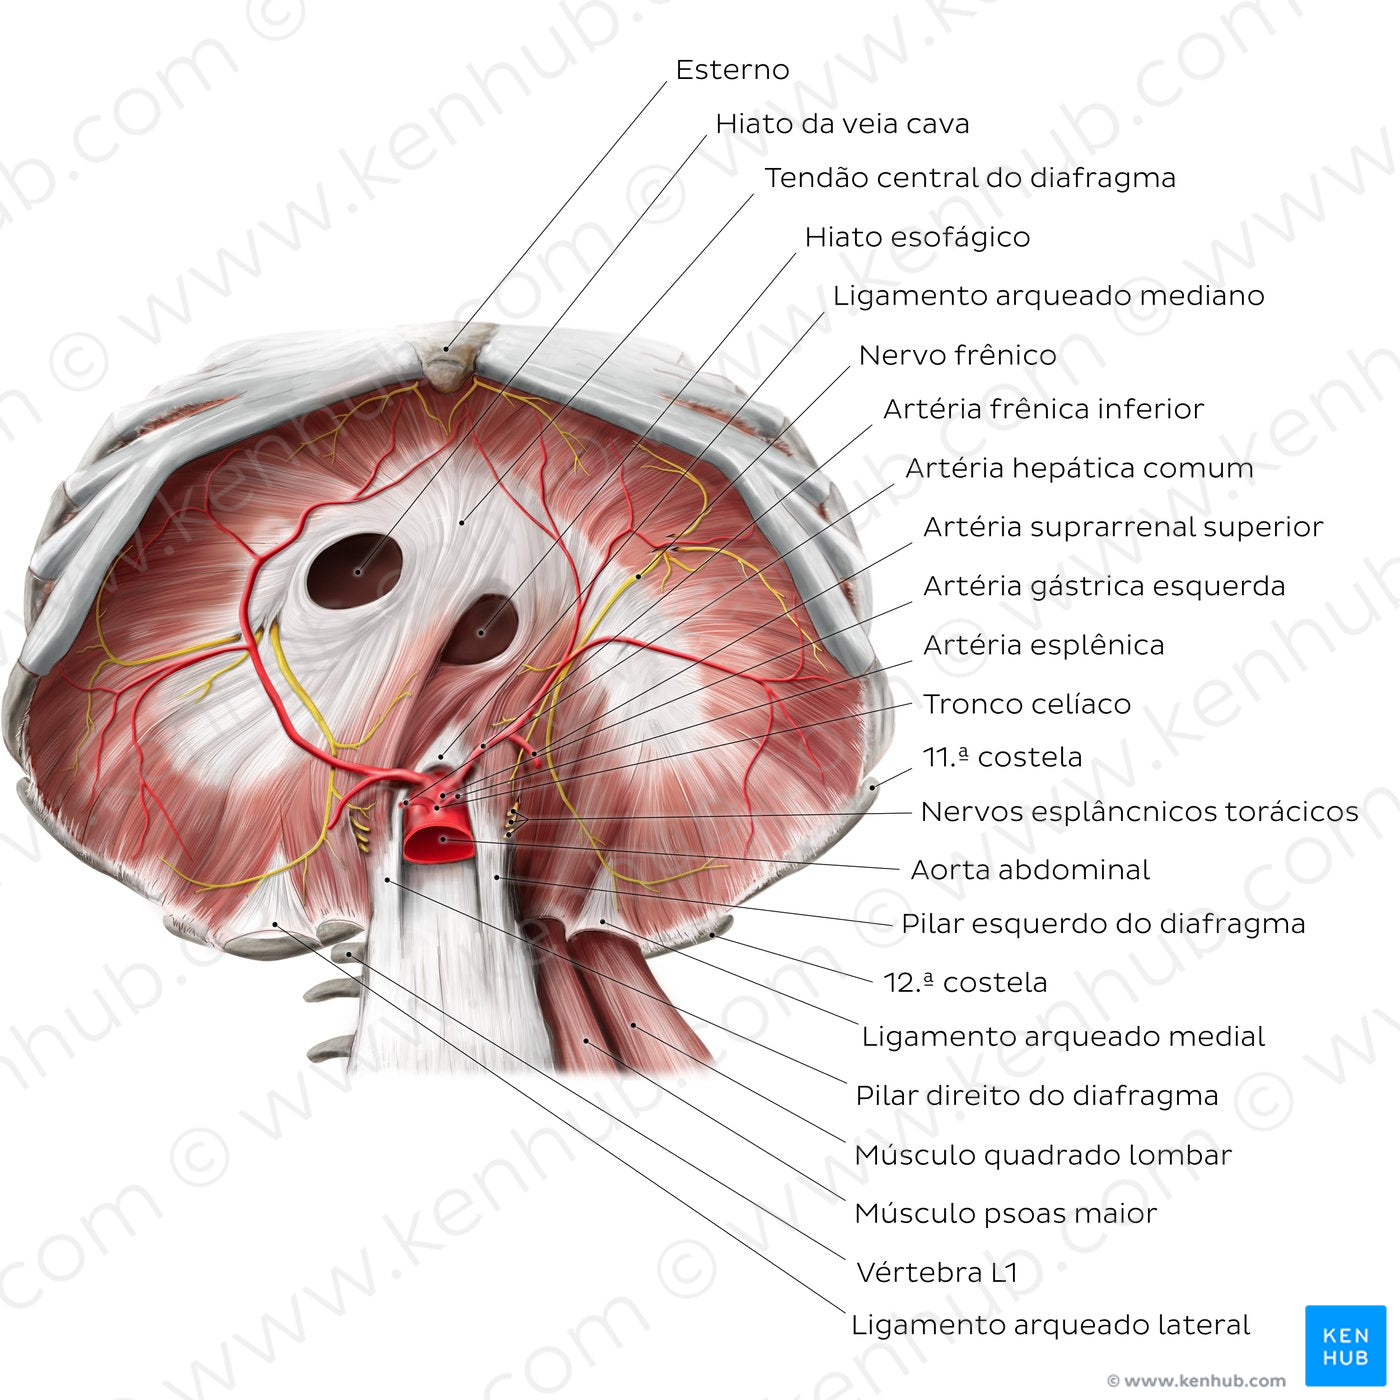 Abdominal surface of the diaphragm (Portuguese)